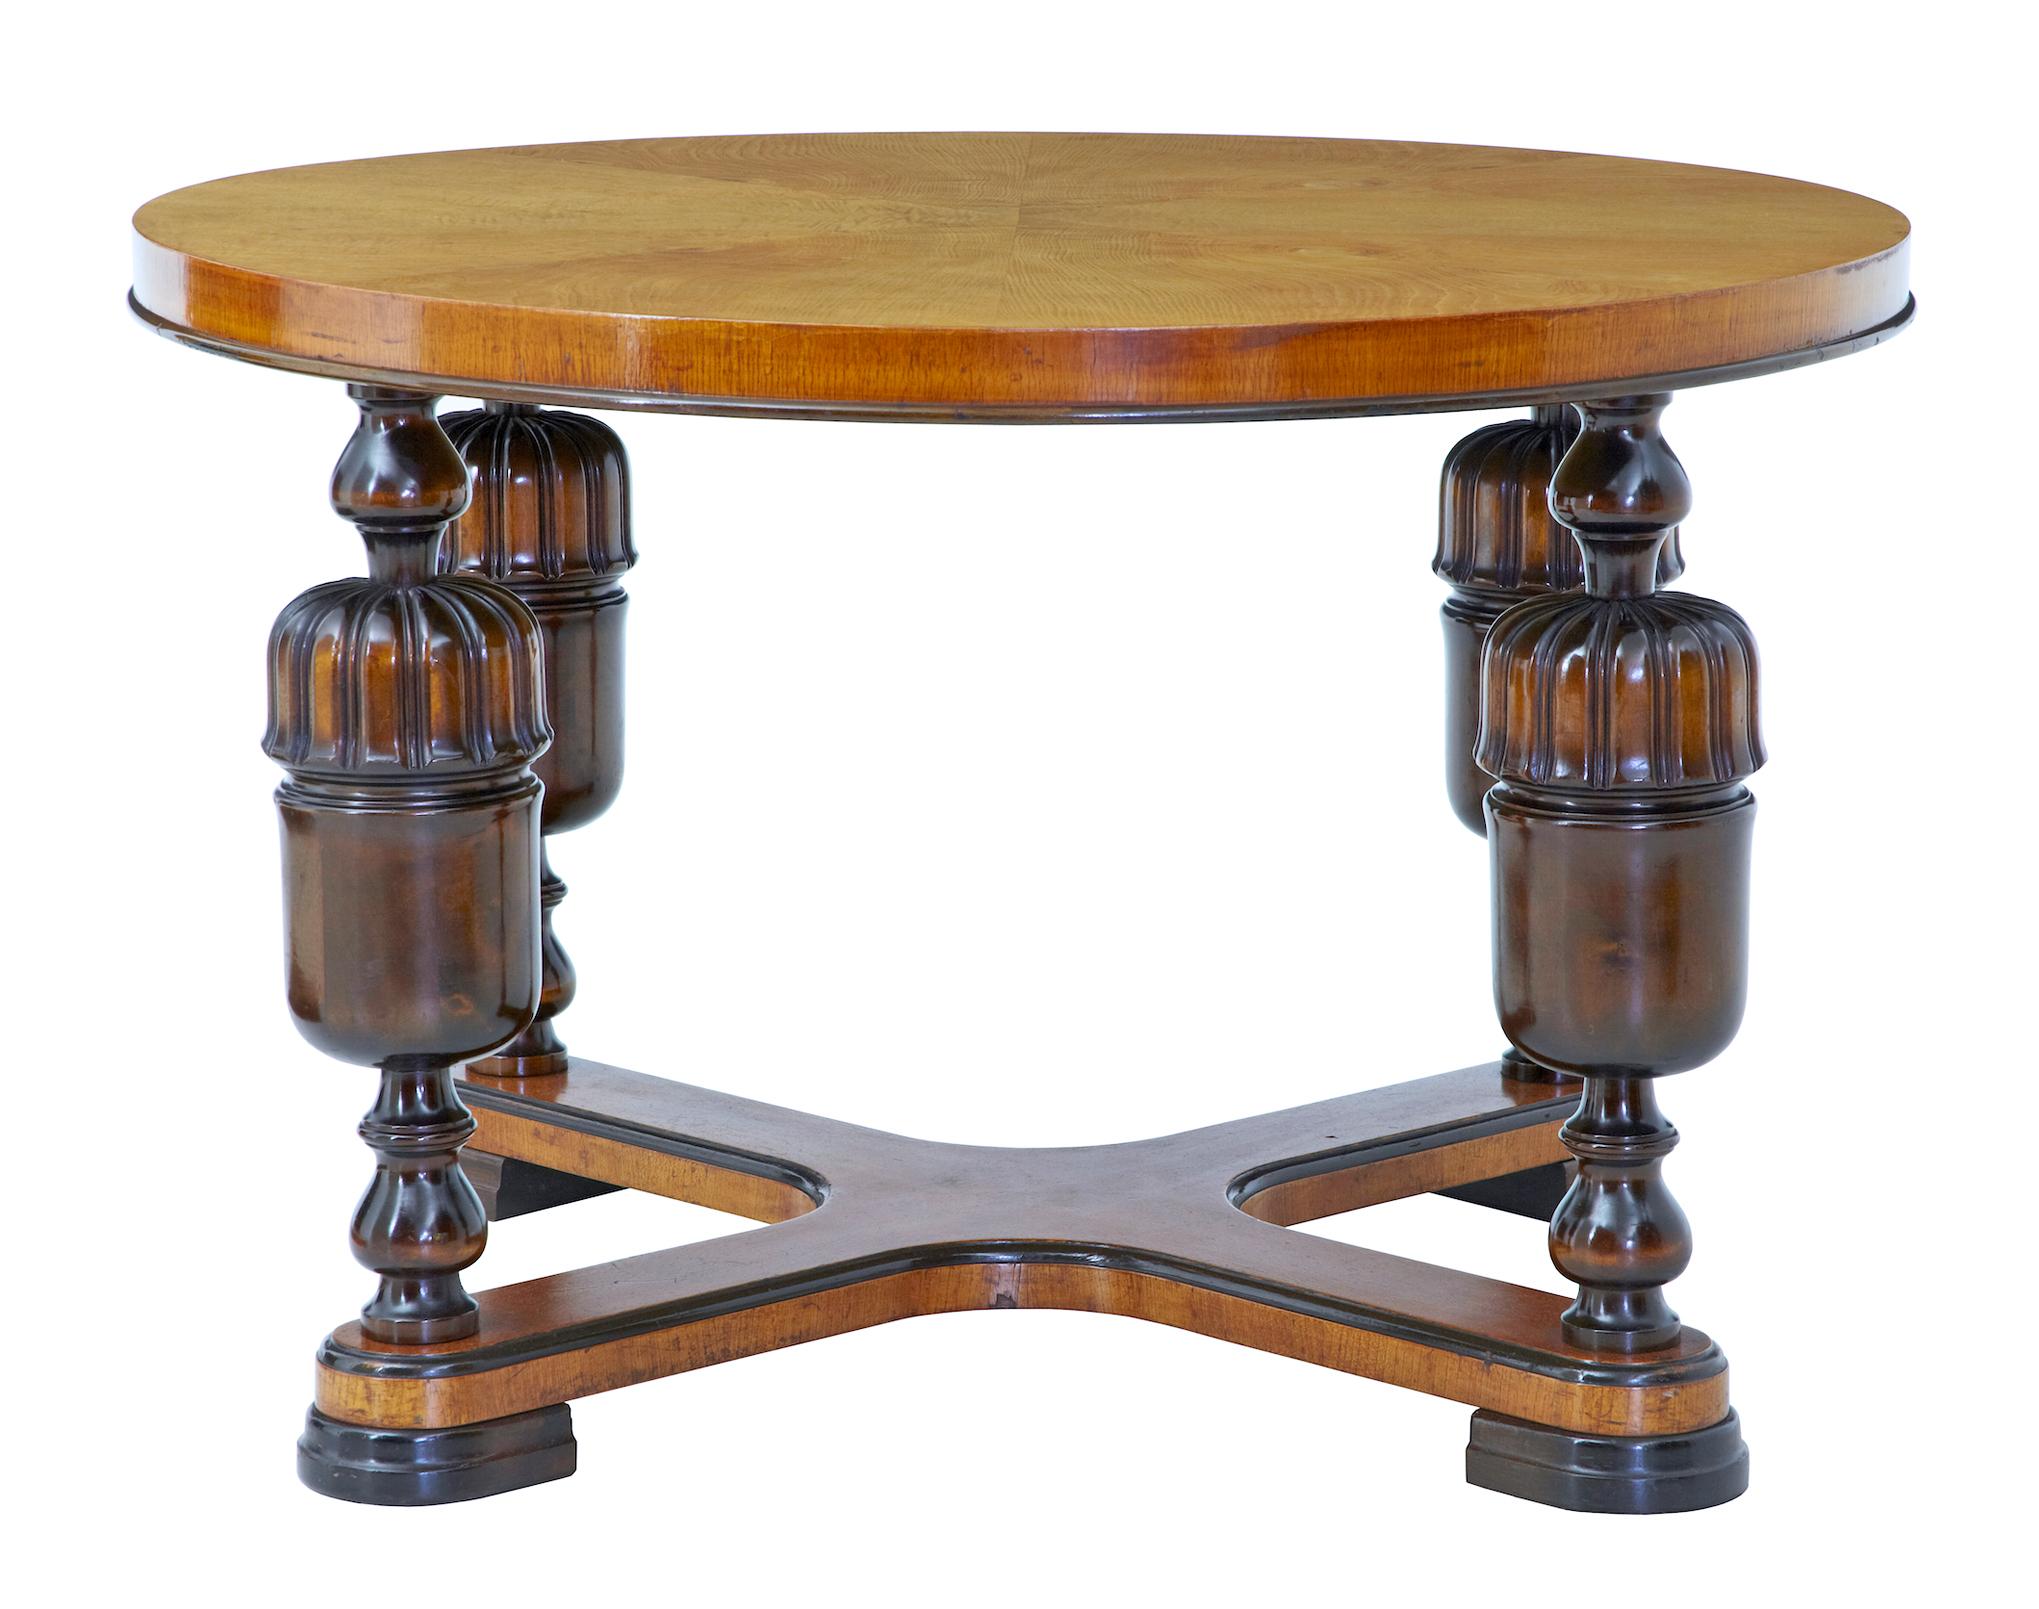 20th century Art Deco birch and elm coffee table, circa 1940.

Circular table top with matched elm veneers. Thick top is supported by 4 turned and fluted baluster legs united by an X-frame stretcher. Standing on ebonized flat hoof feet.

Minor